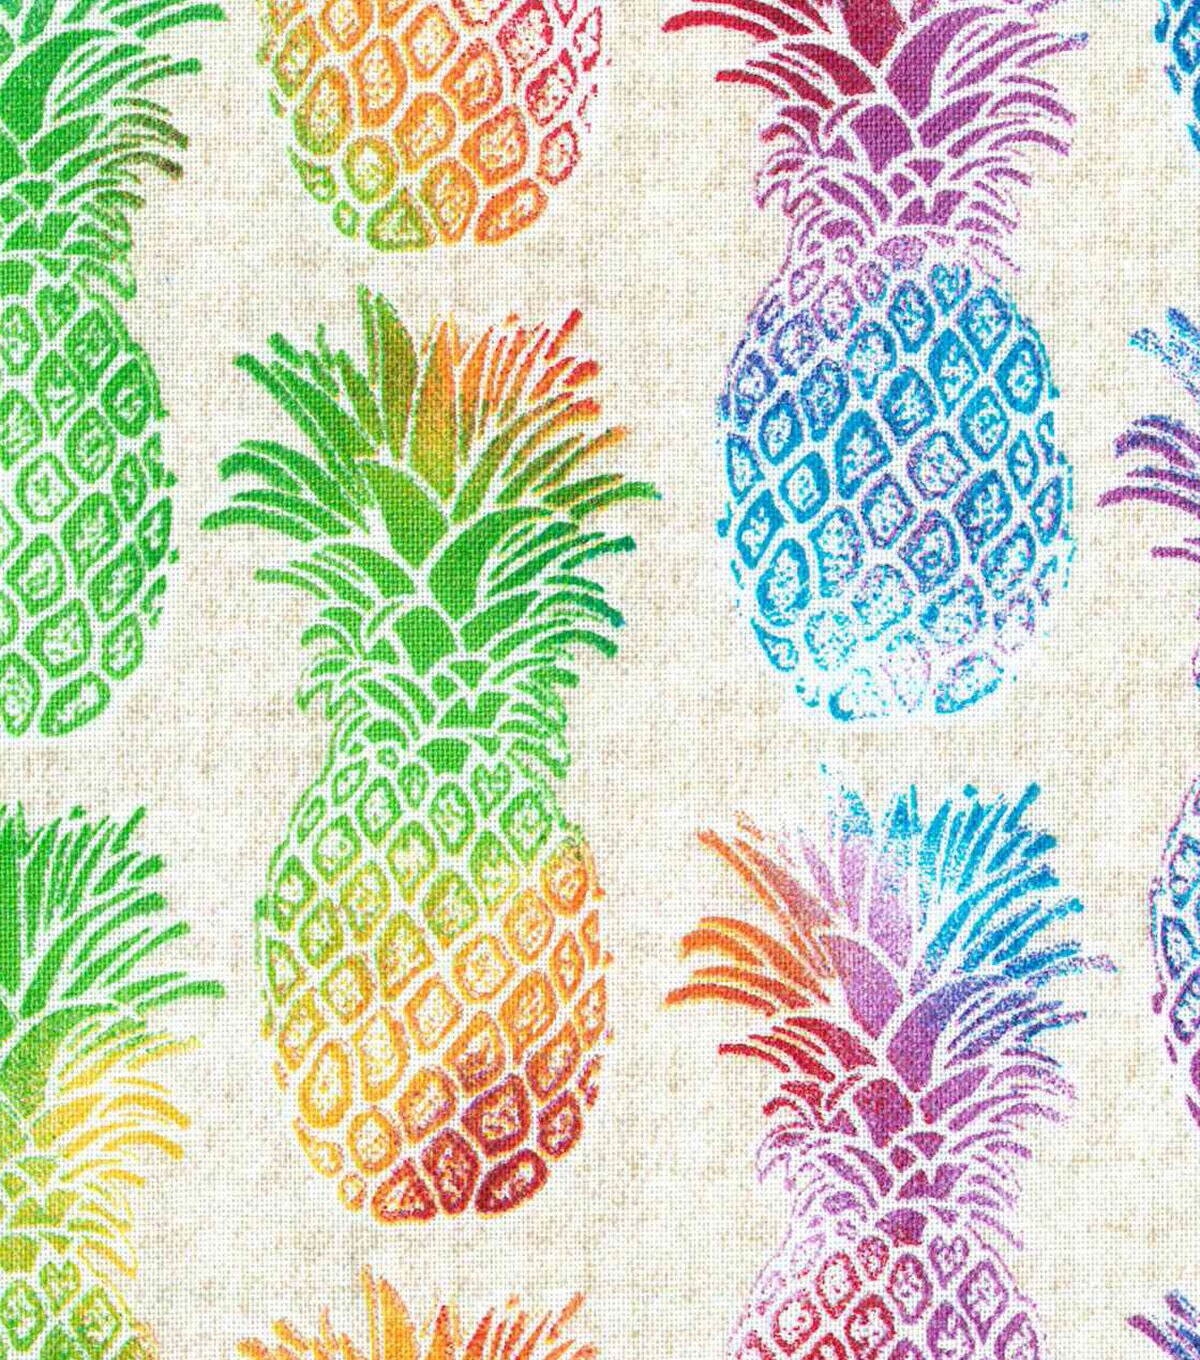 Printed Upholstery Fabric Checkered Pineapple Upholstery Fabric Fabric by the Yard Checked Pineapple Fabric Pineapple Canvas Fabric